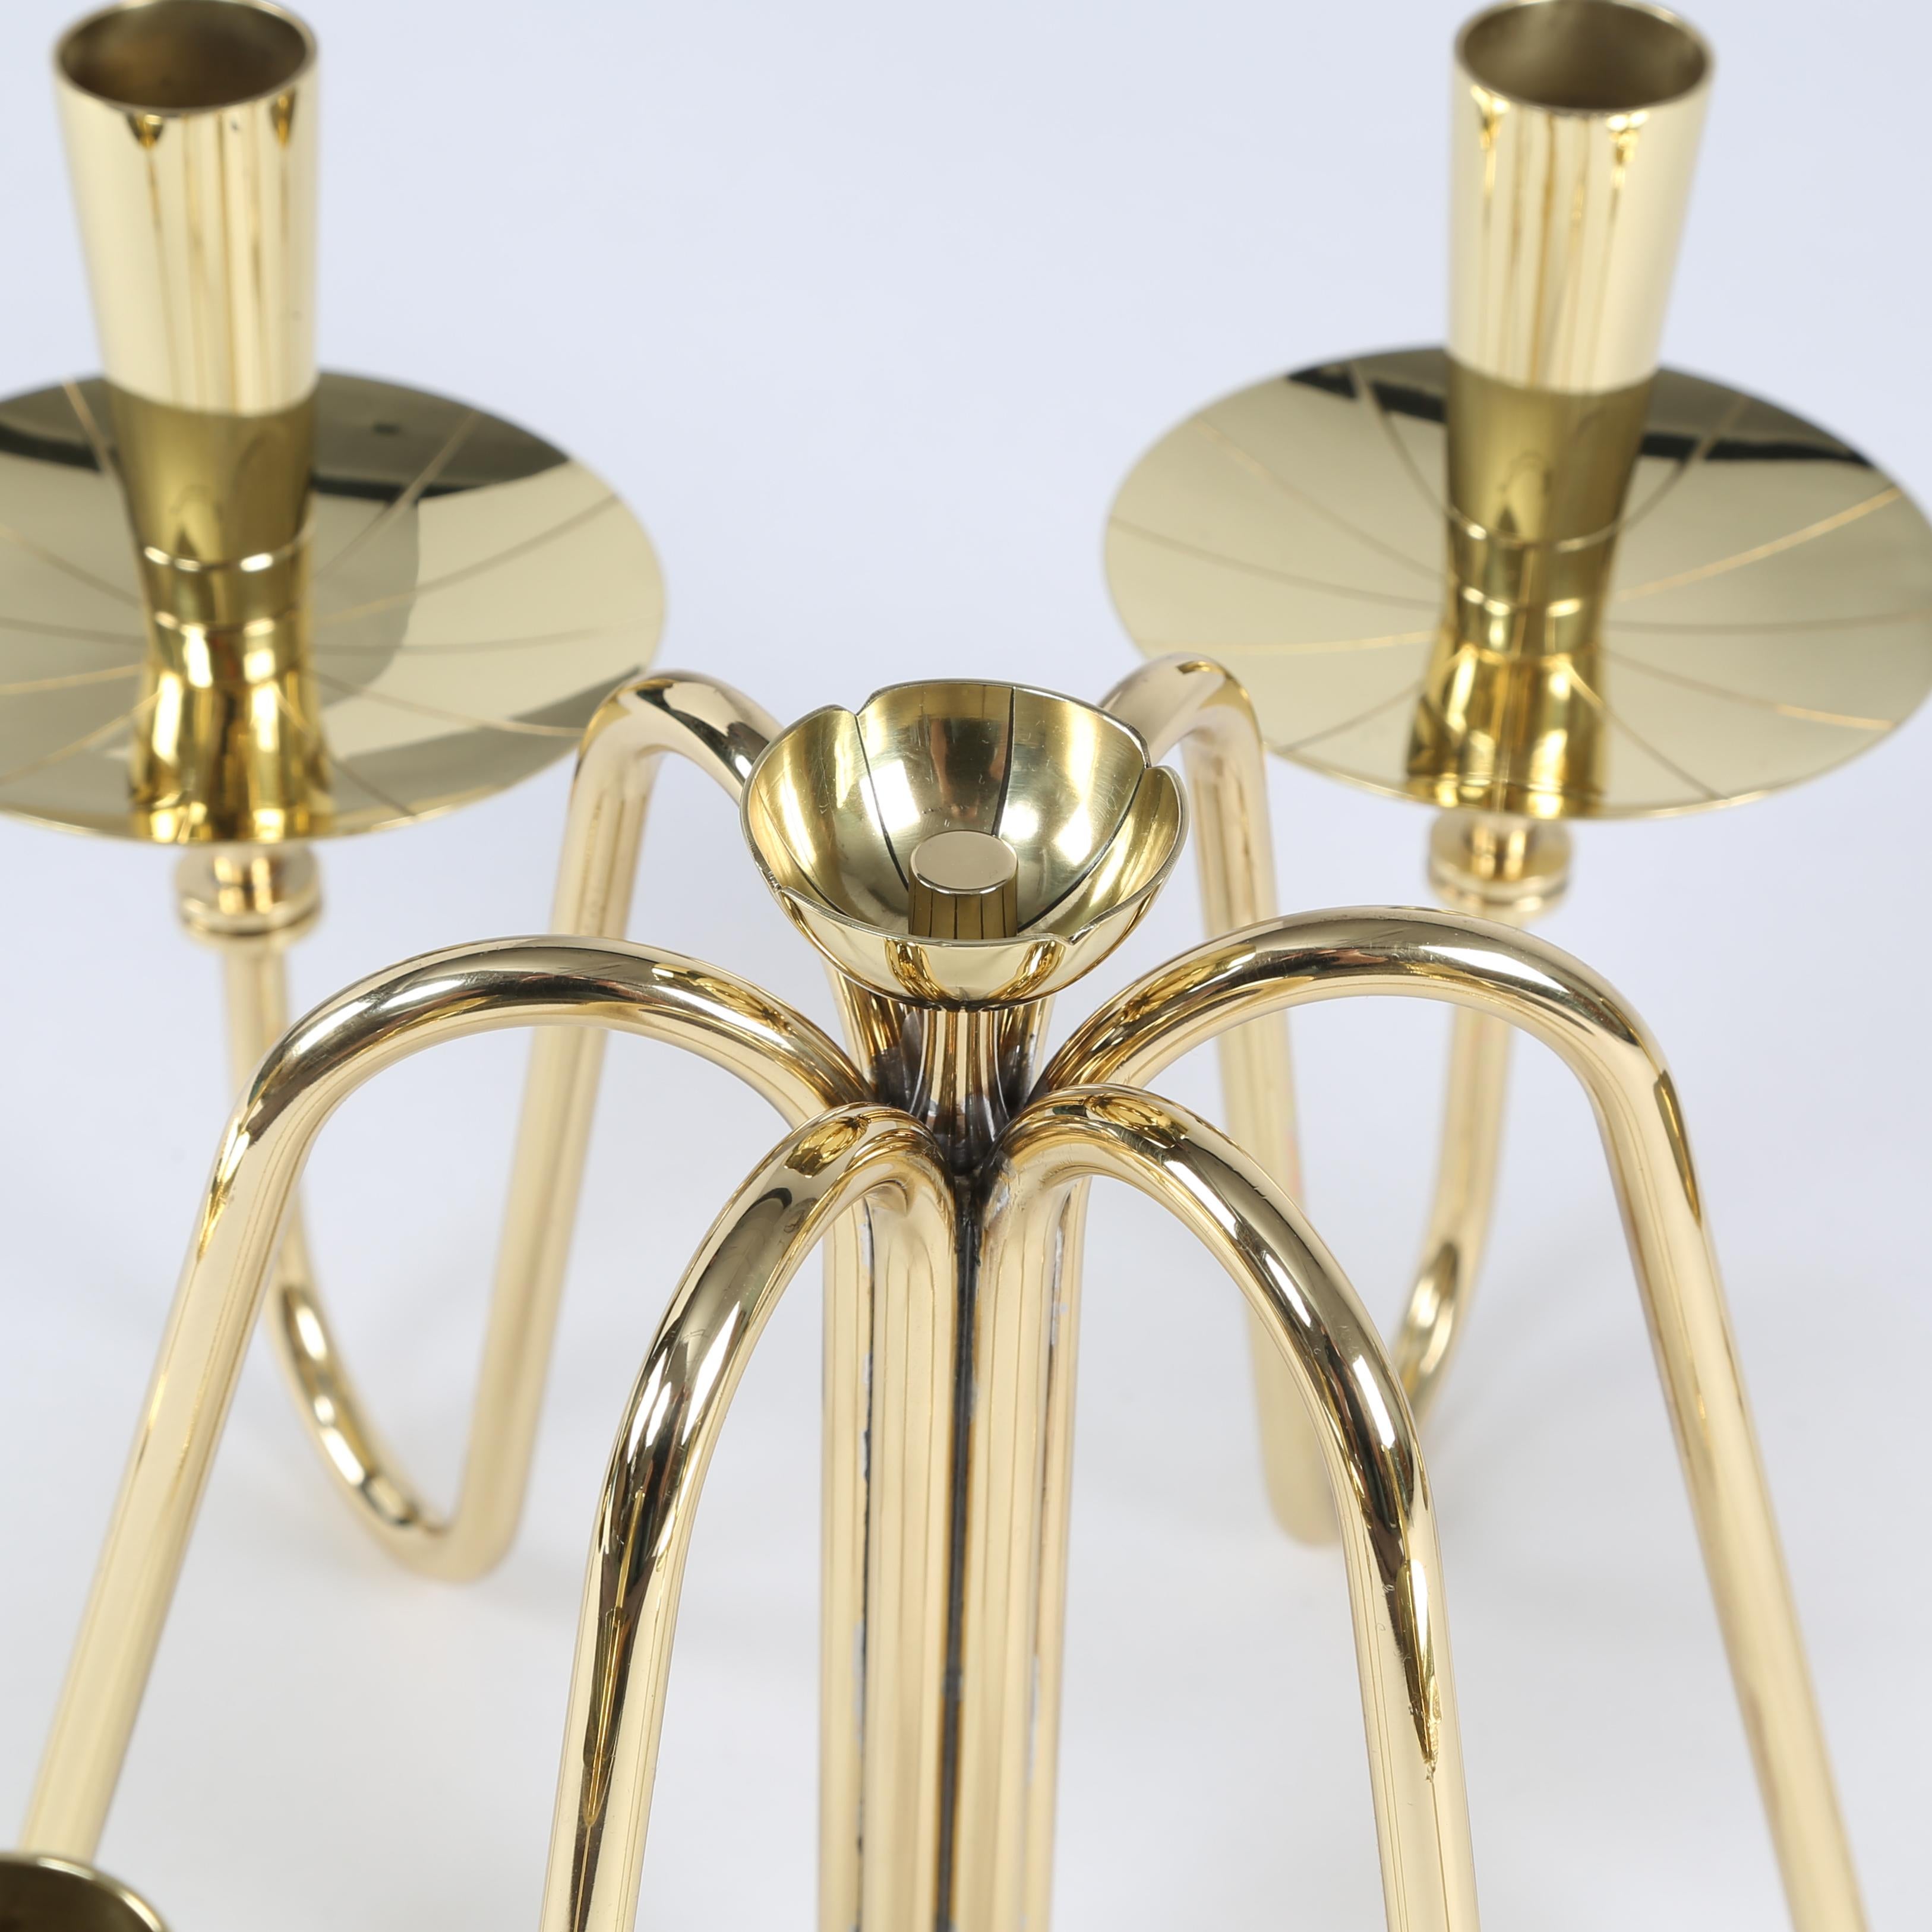 Hand-Crafted Tommi Parzinger Pair of Flower Candelabra in Polished Brass 1950s